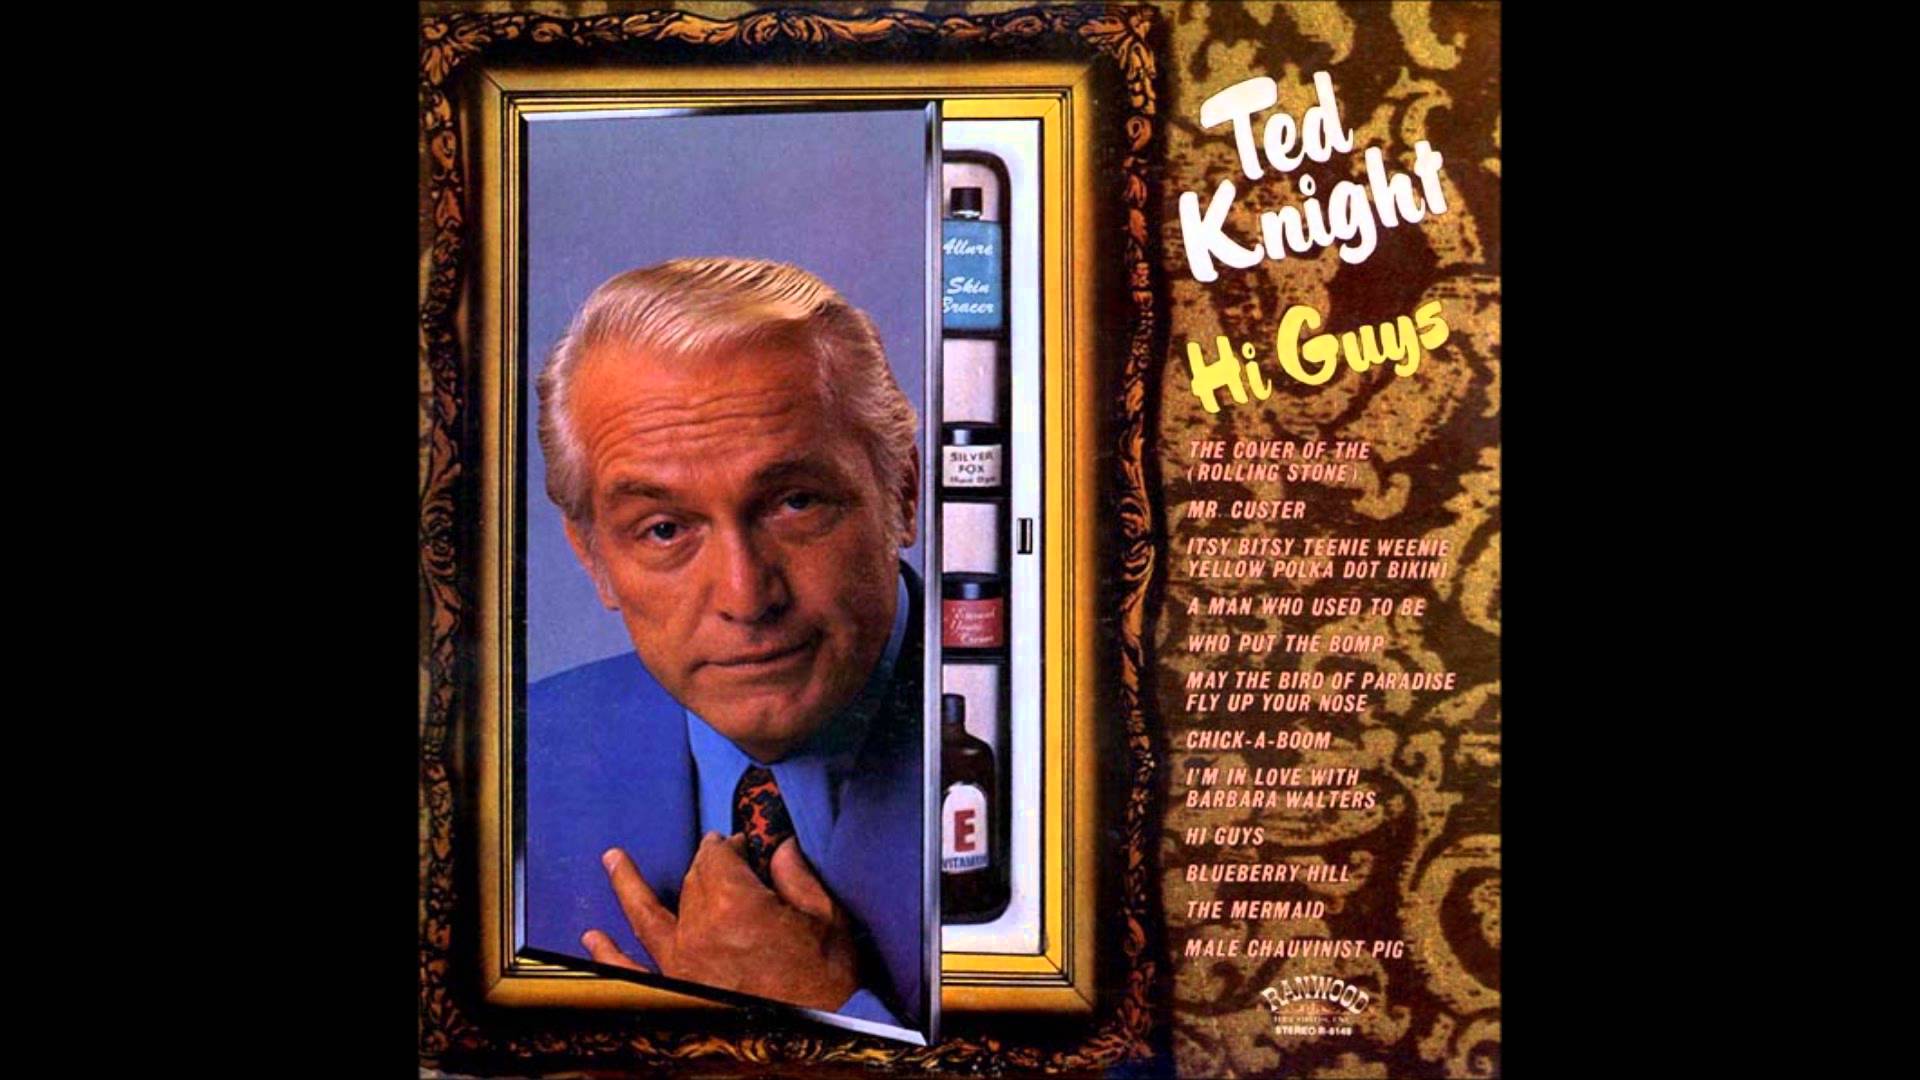 images-of-ted-knight